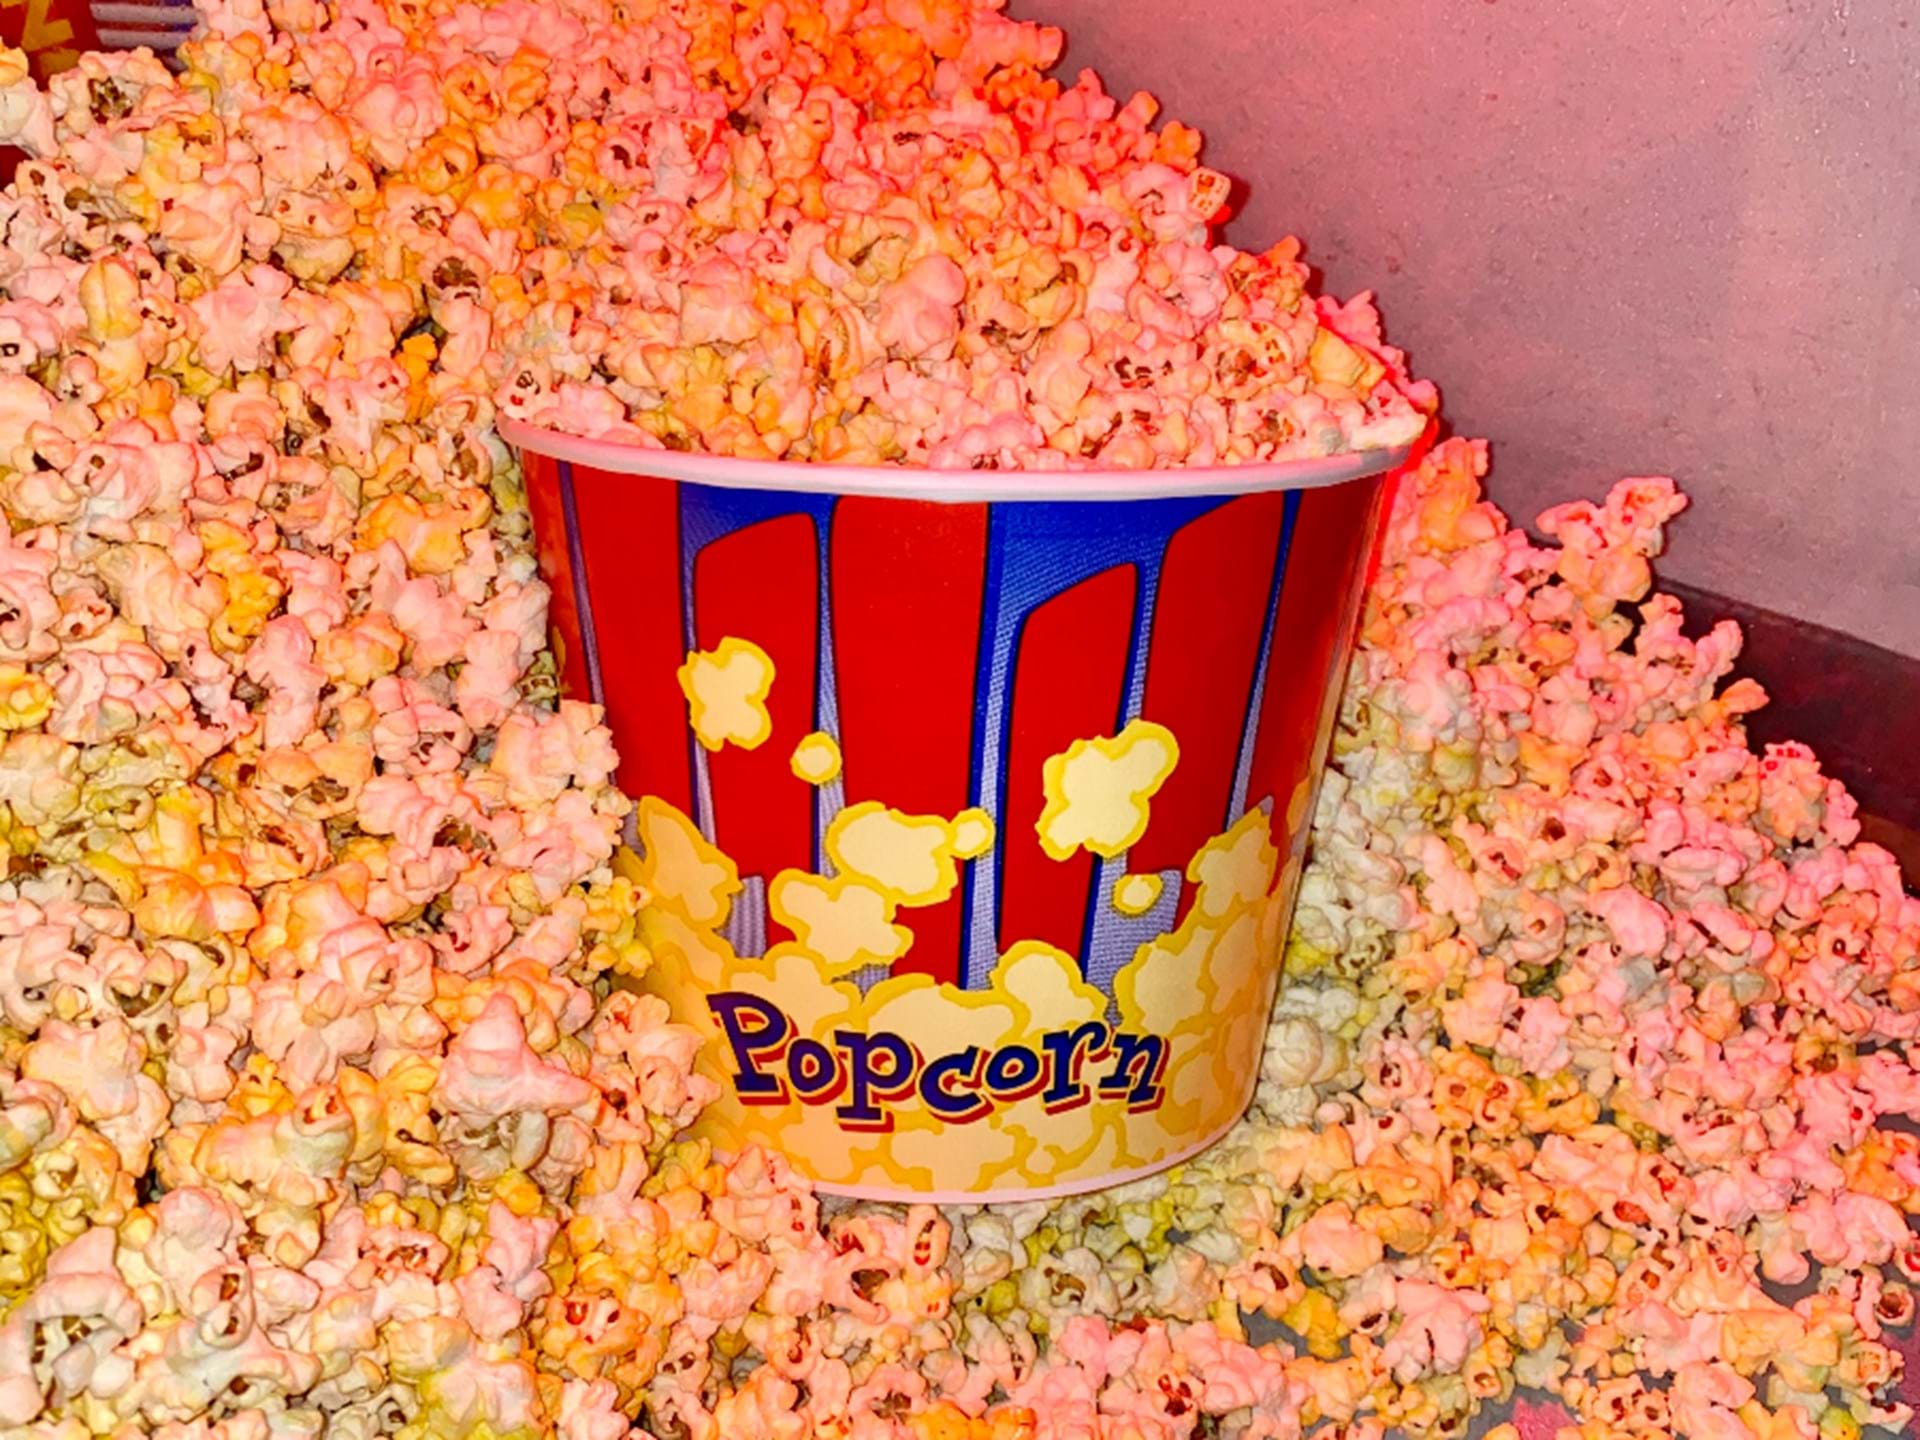 Popcorn is a must at the movies & ours is popped in a retro Manley machine. A large bucket with butter is just $3!